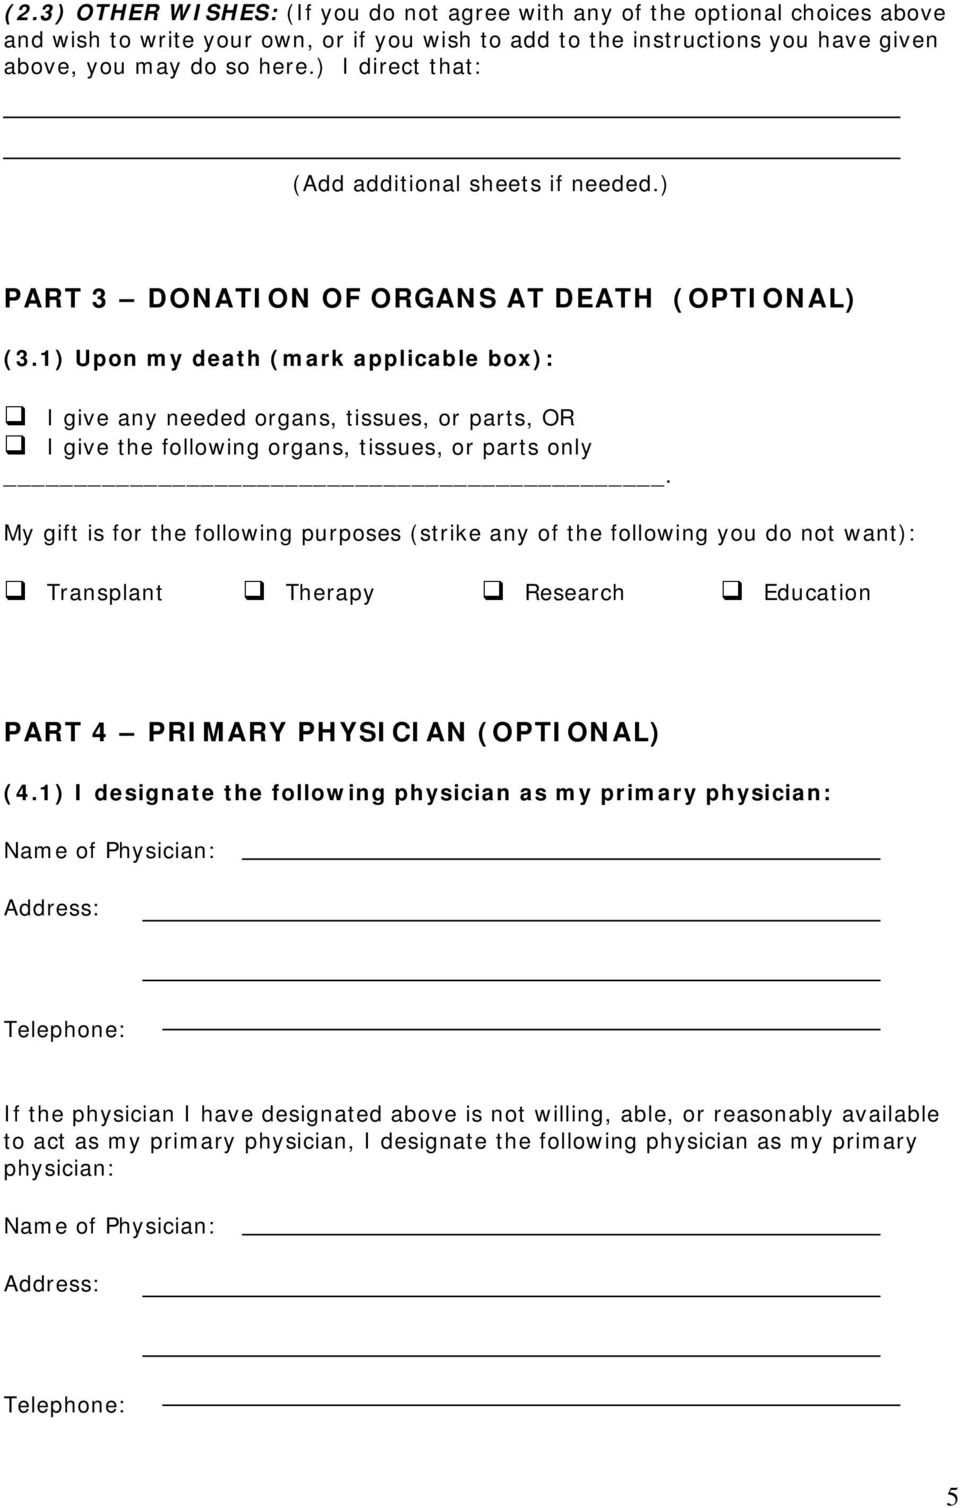 1) Upon my death (mark applicable box): I give any needed organs, tissues, or parts, OR I give the following organs, tissues, or parts only.